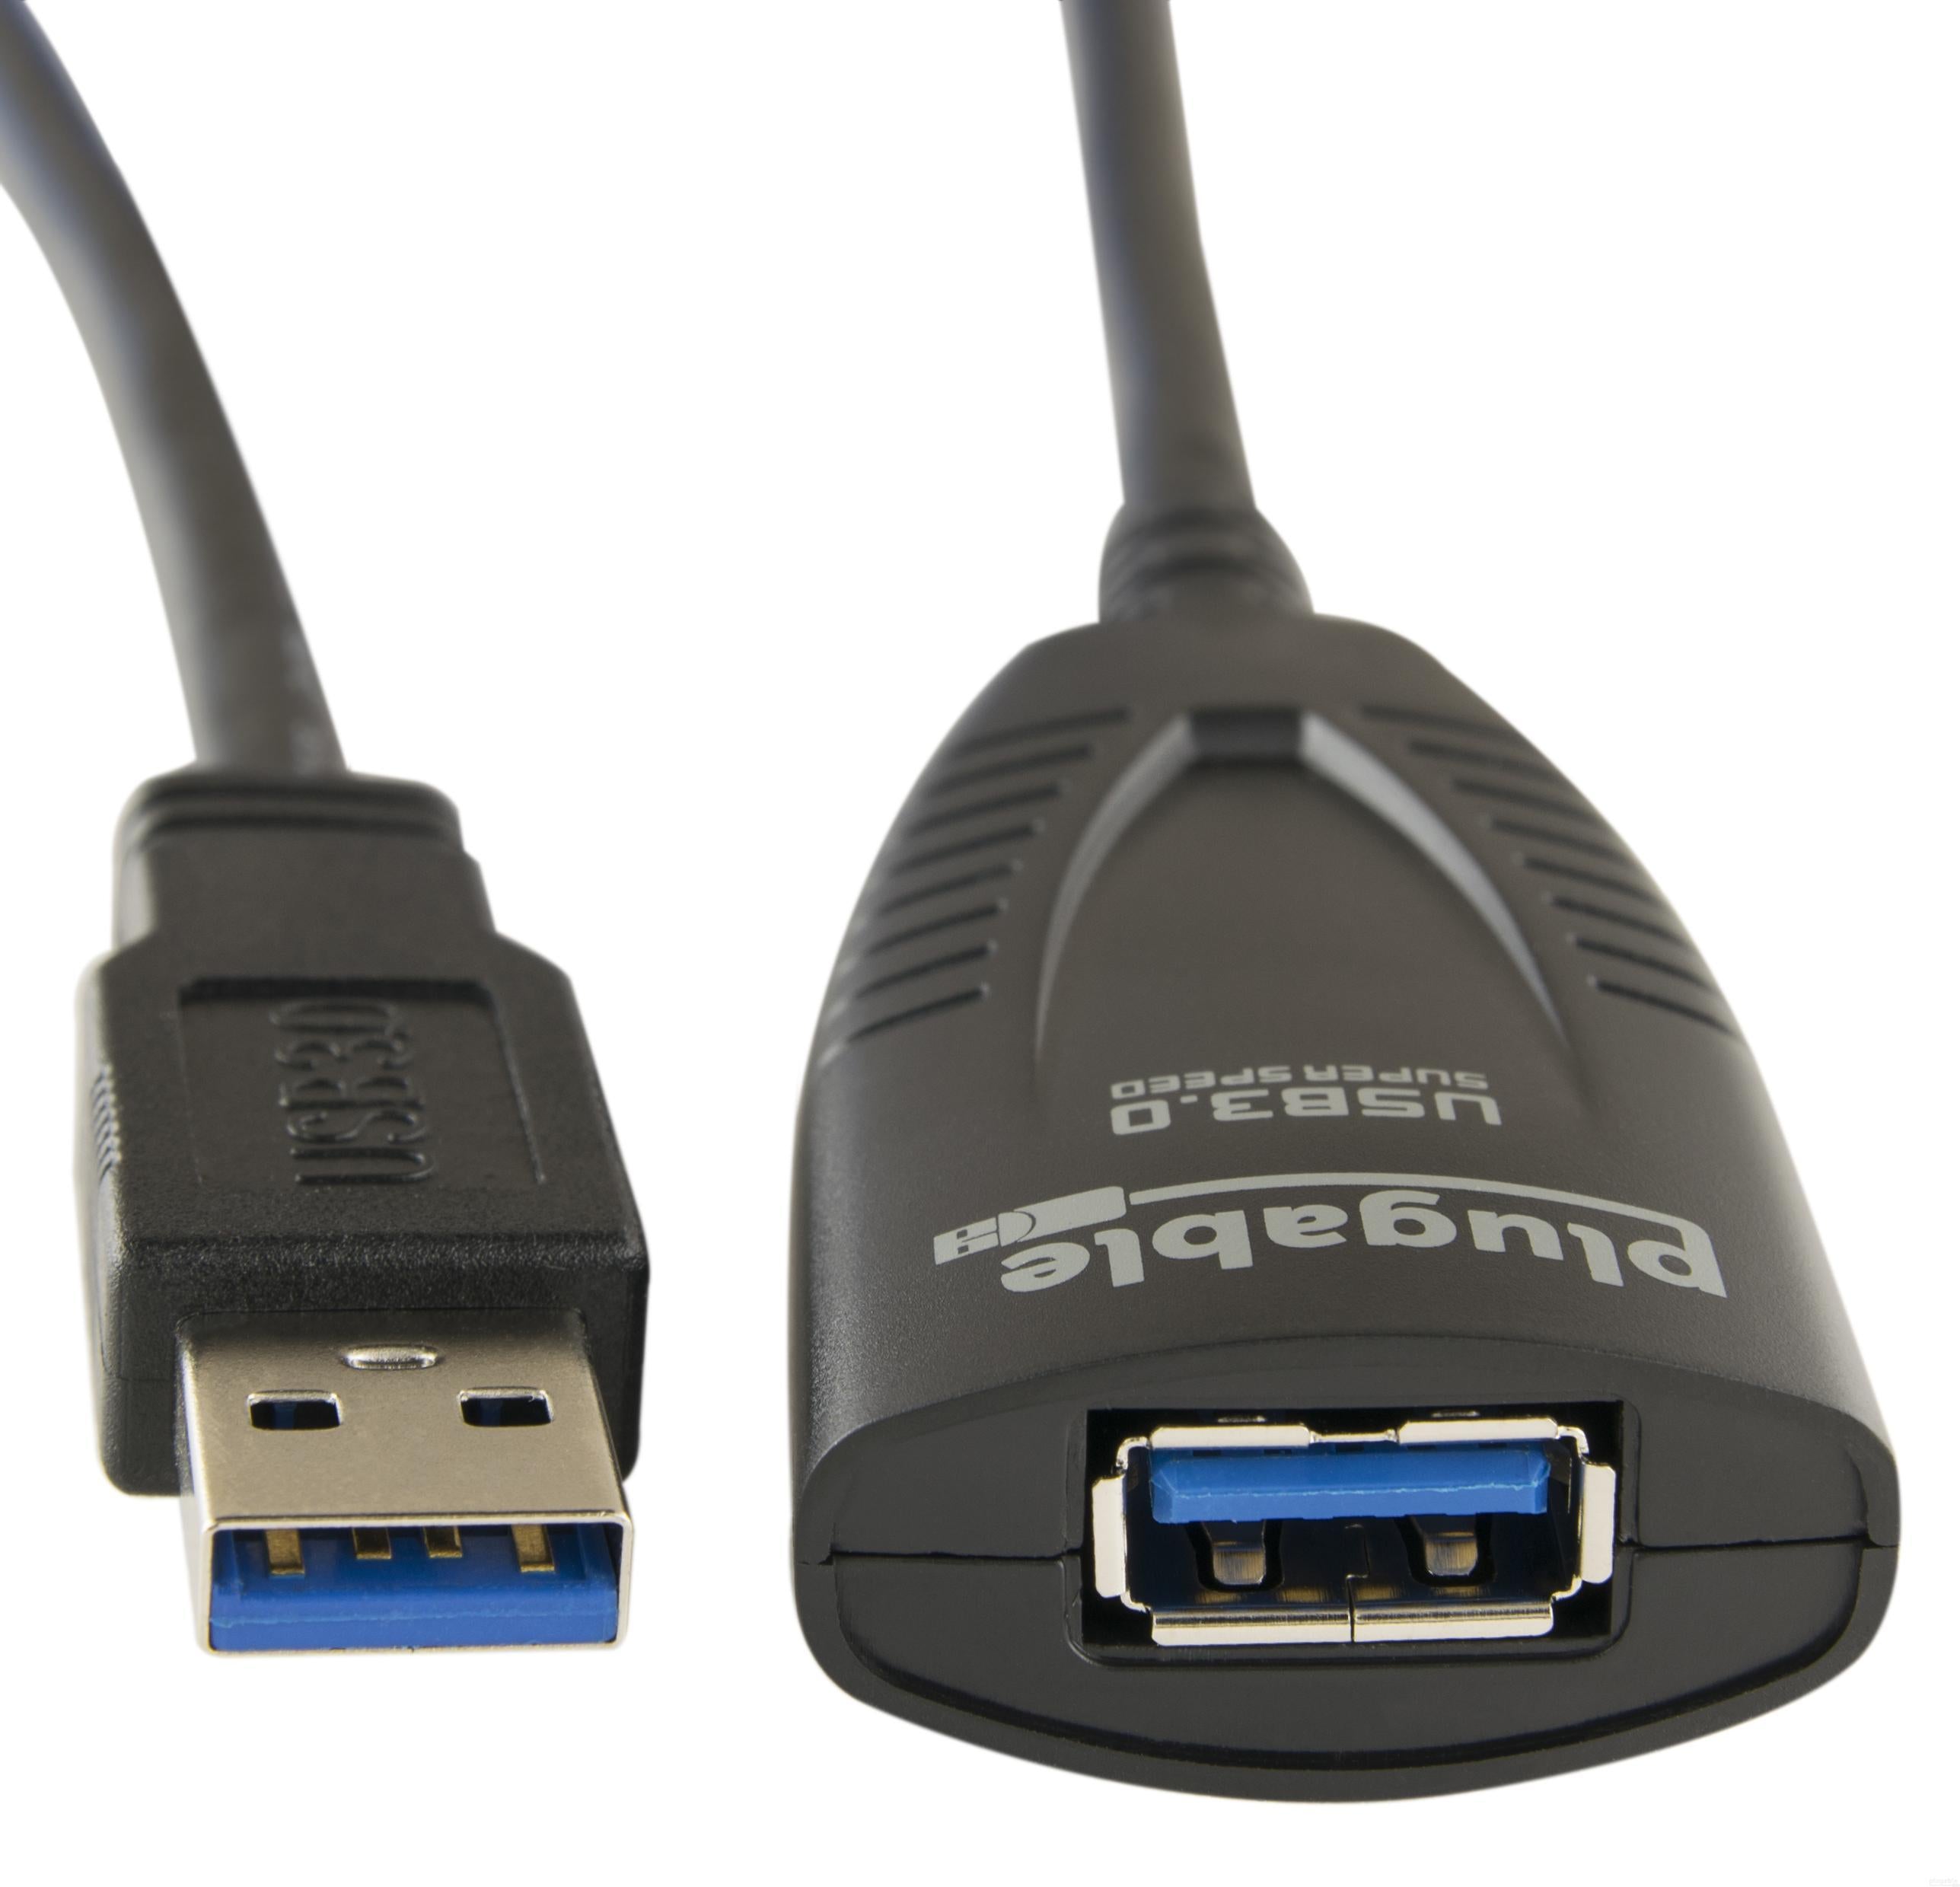 krone kurve kompleksitet Plugable USB 3.0 5M (16ft) Extension Cable with Power Adapter and Back –  Plugable Technologies